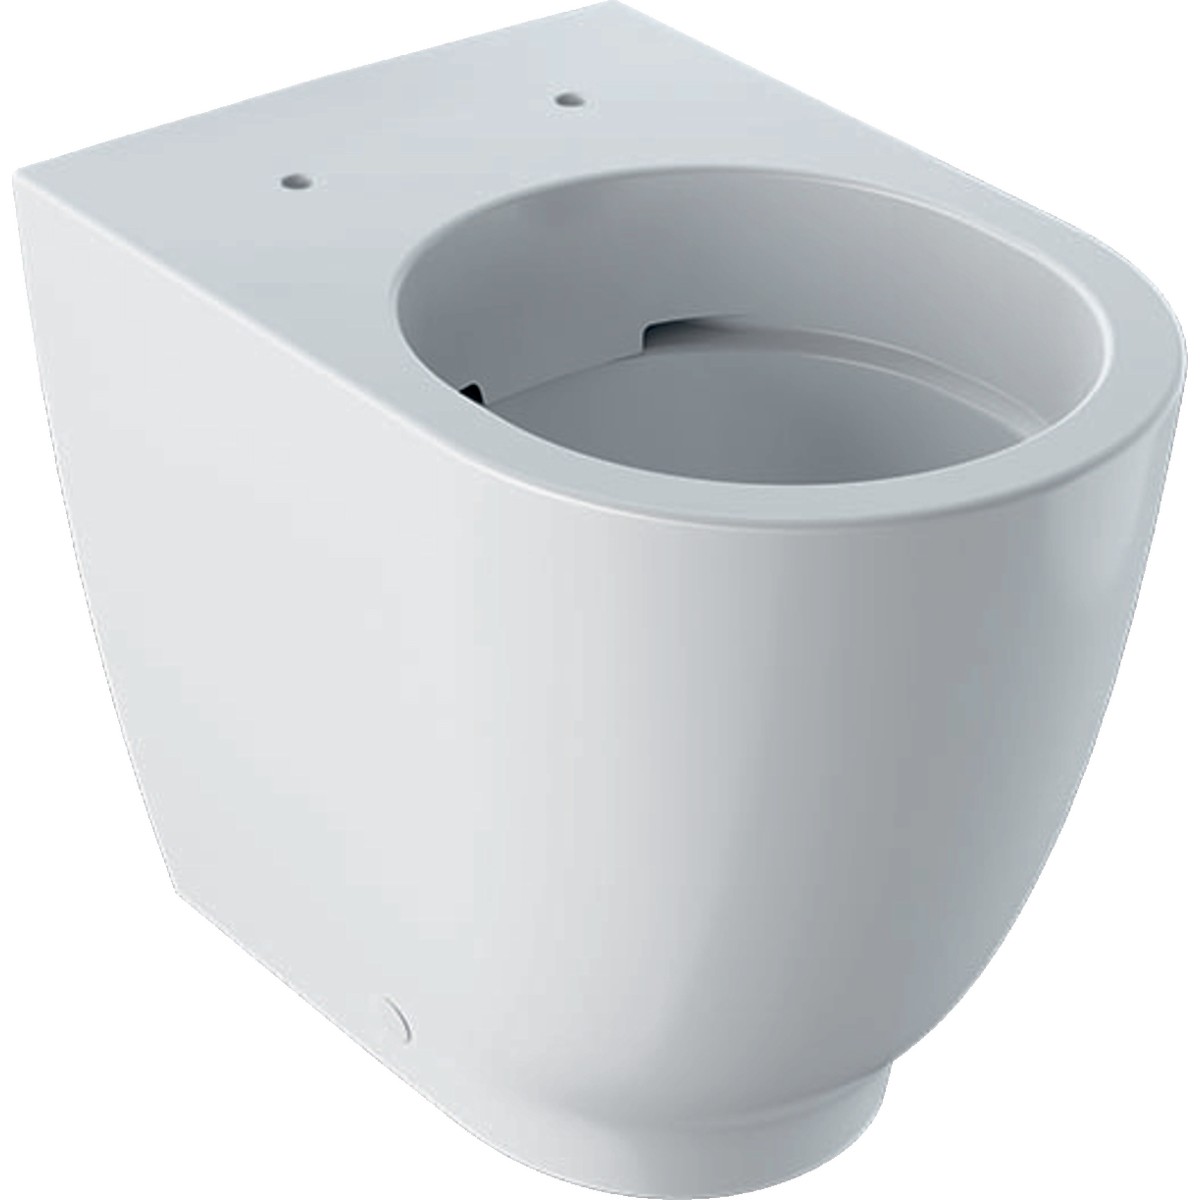 Geberit Acanto Rimless back to wall pan [500602012] - (WC pan only)